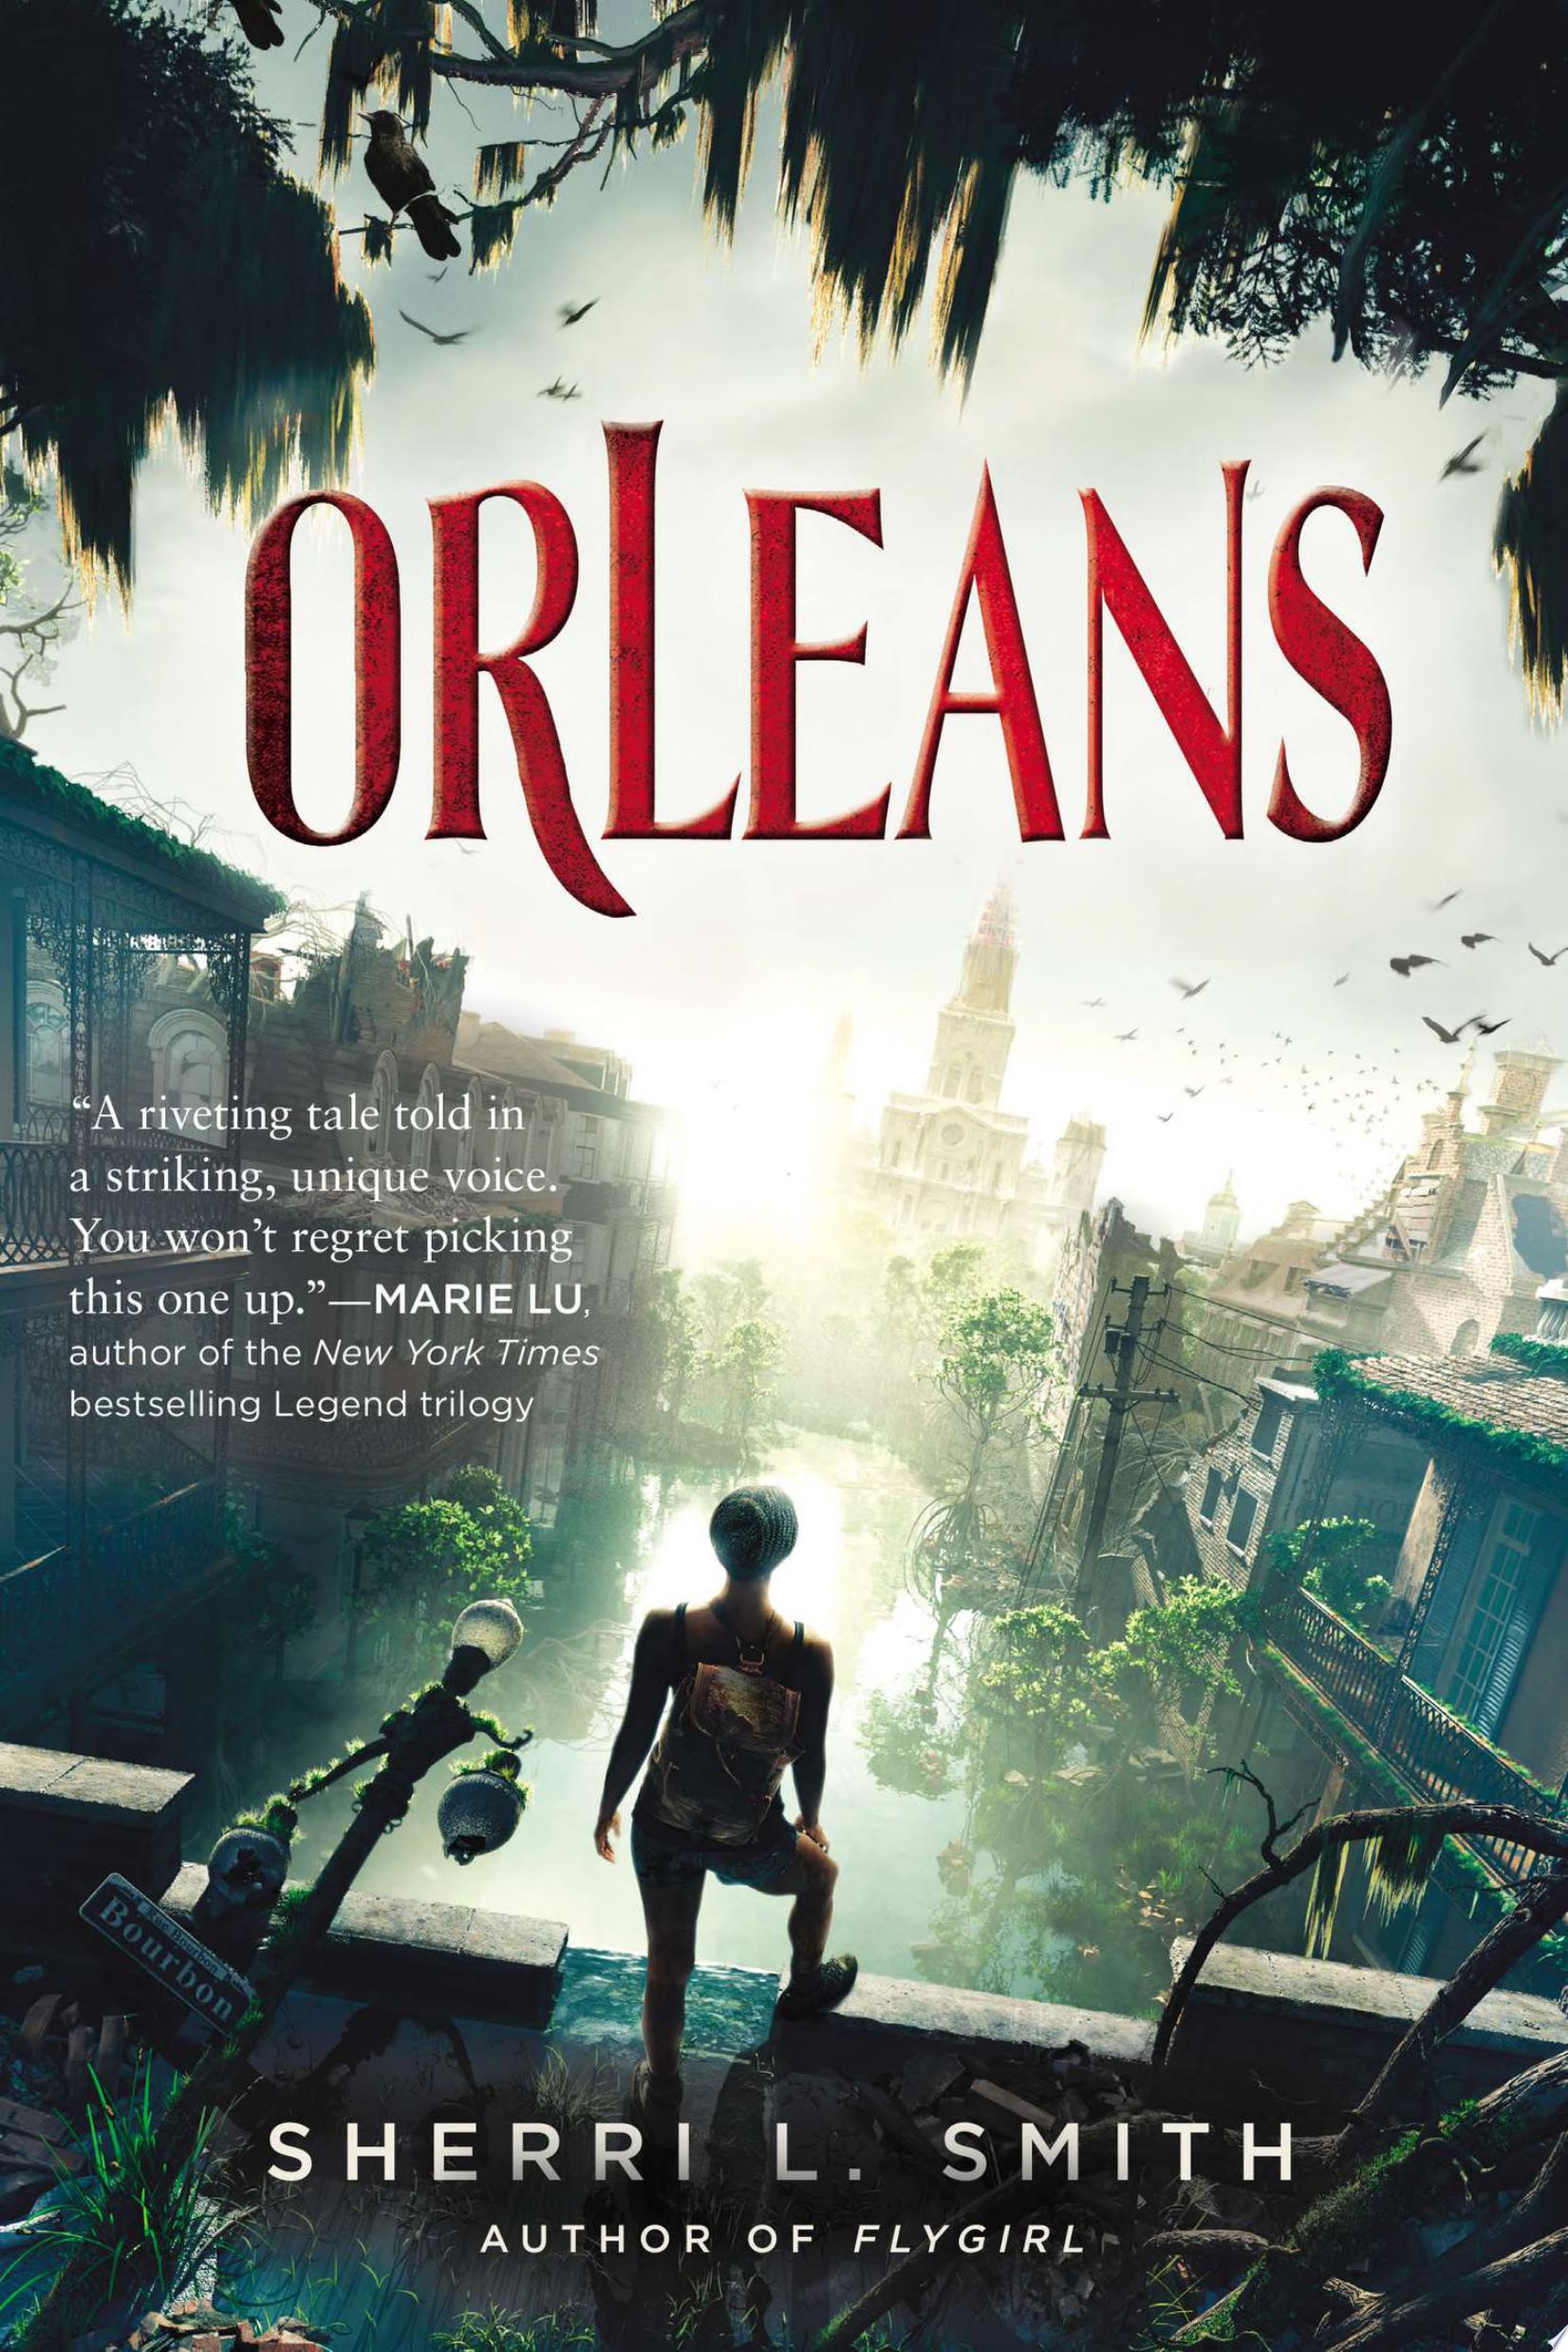 Image for "Orleans"